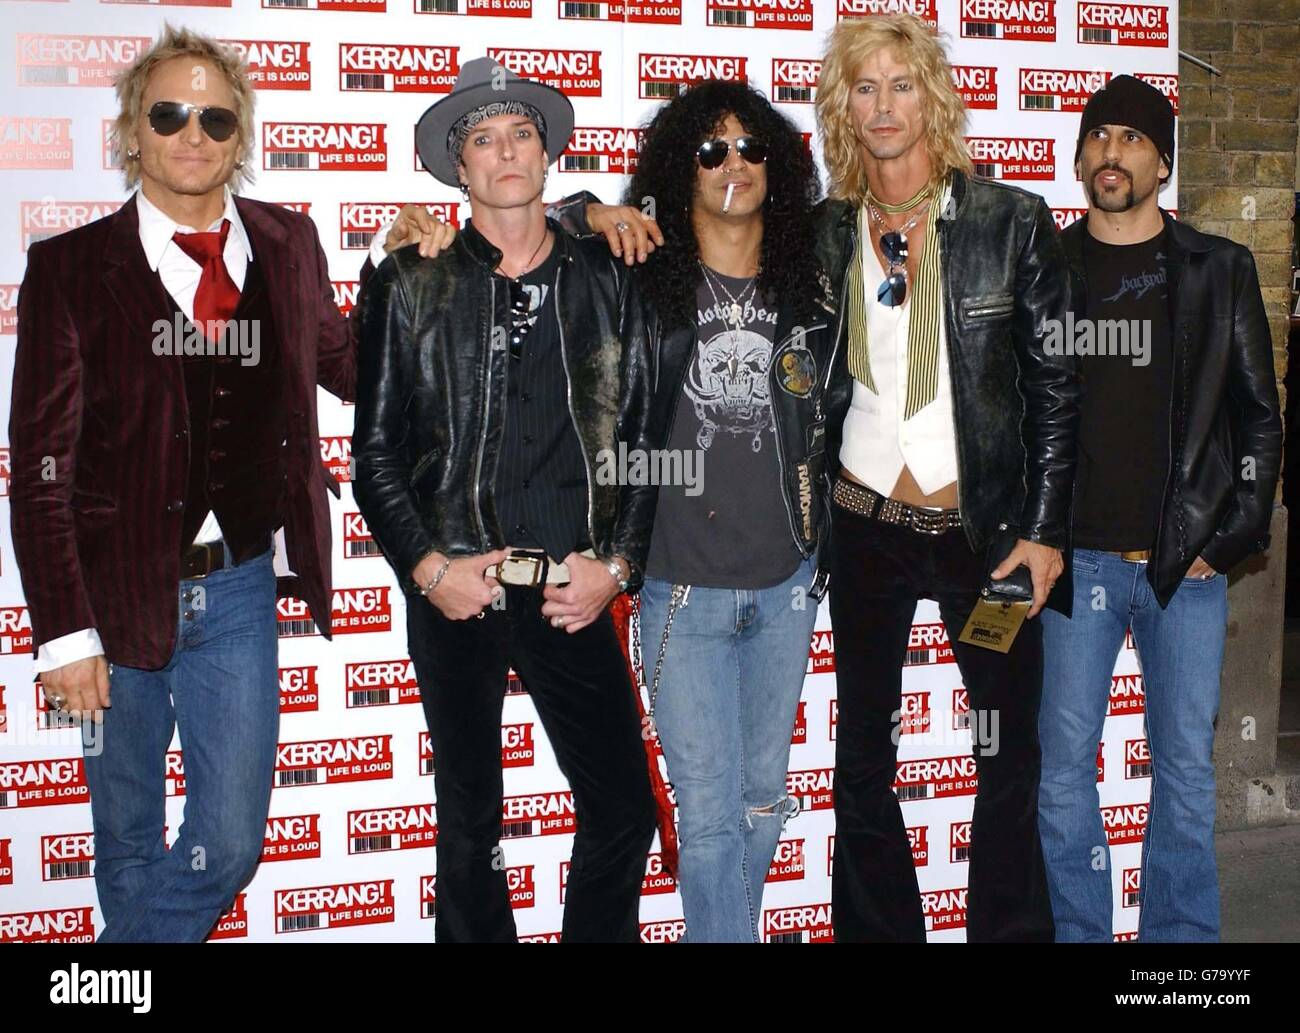 Matt Sorum, Scott Weiland, Slash, Duff McKagan and Dave Kushner of US group Velvet Revolver arrive for the 11th annual Kerrang! Awards at The Brewery in east London, organised by the rock music magazine Kerrang!. Stock Photo